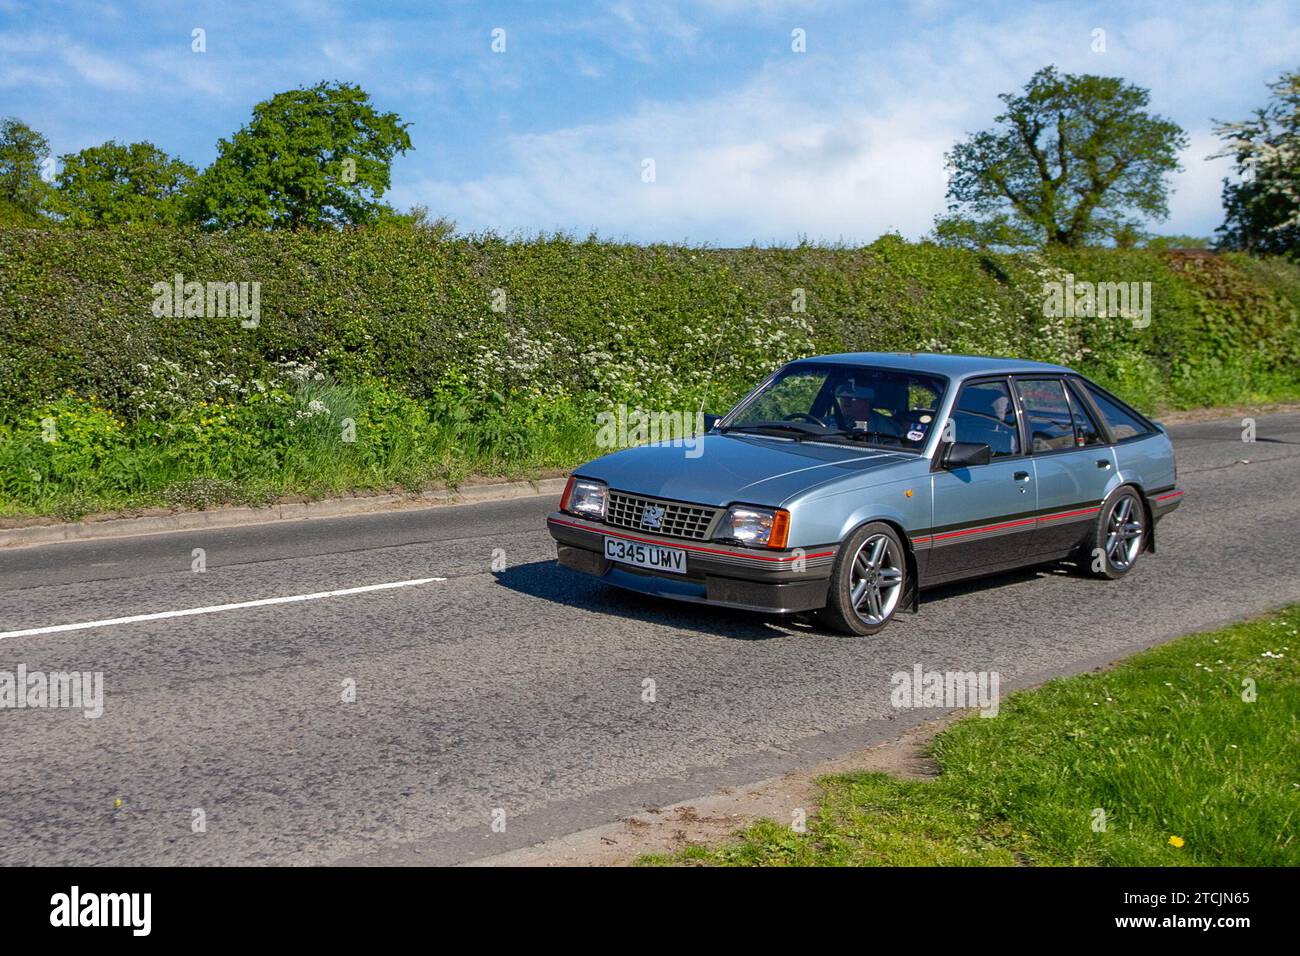 1986 80s eighties Blue Vauxhall Cavalier Mk2b 1798cc petrol saloon. Vintage, restored classic motors, automobile collectors motoring enthusiasts, historic veteran cars travelling in Cheshire, UK Stock Photo